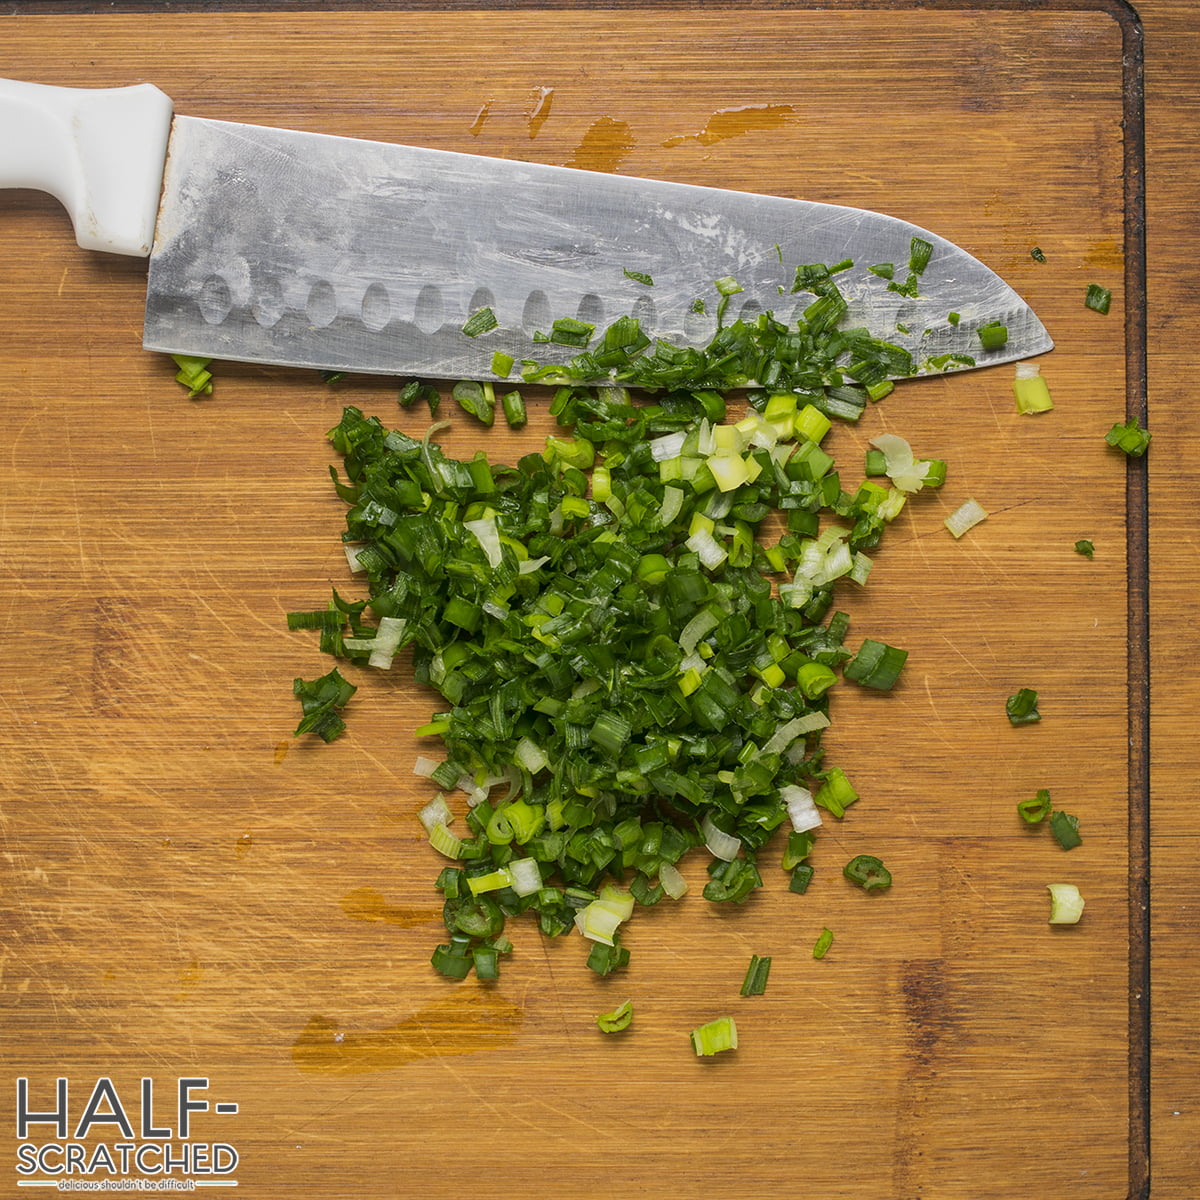 Chopped green onions on a wooden cutting board with a knife